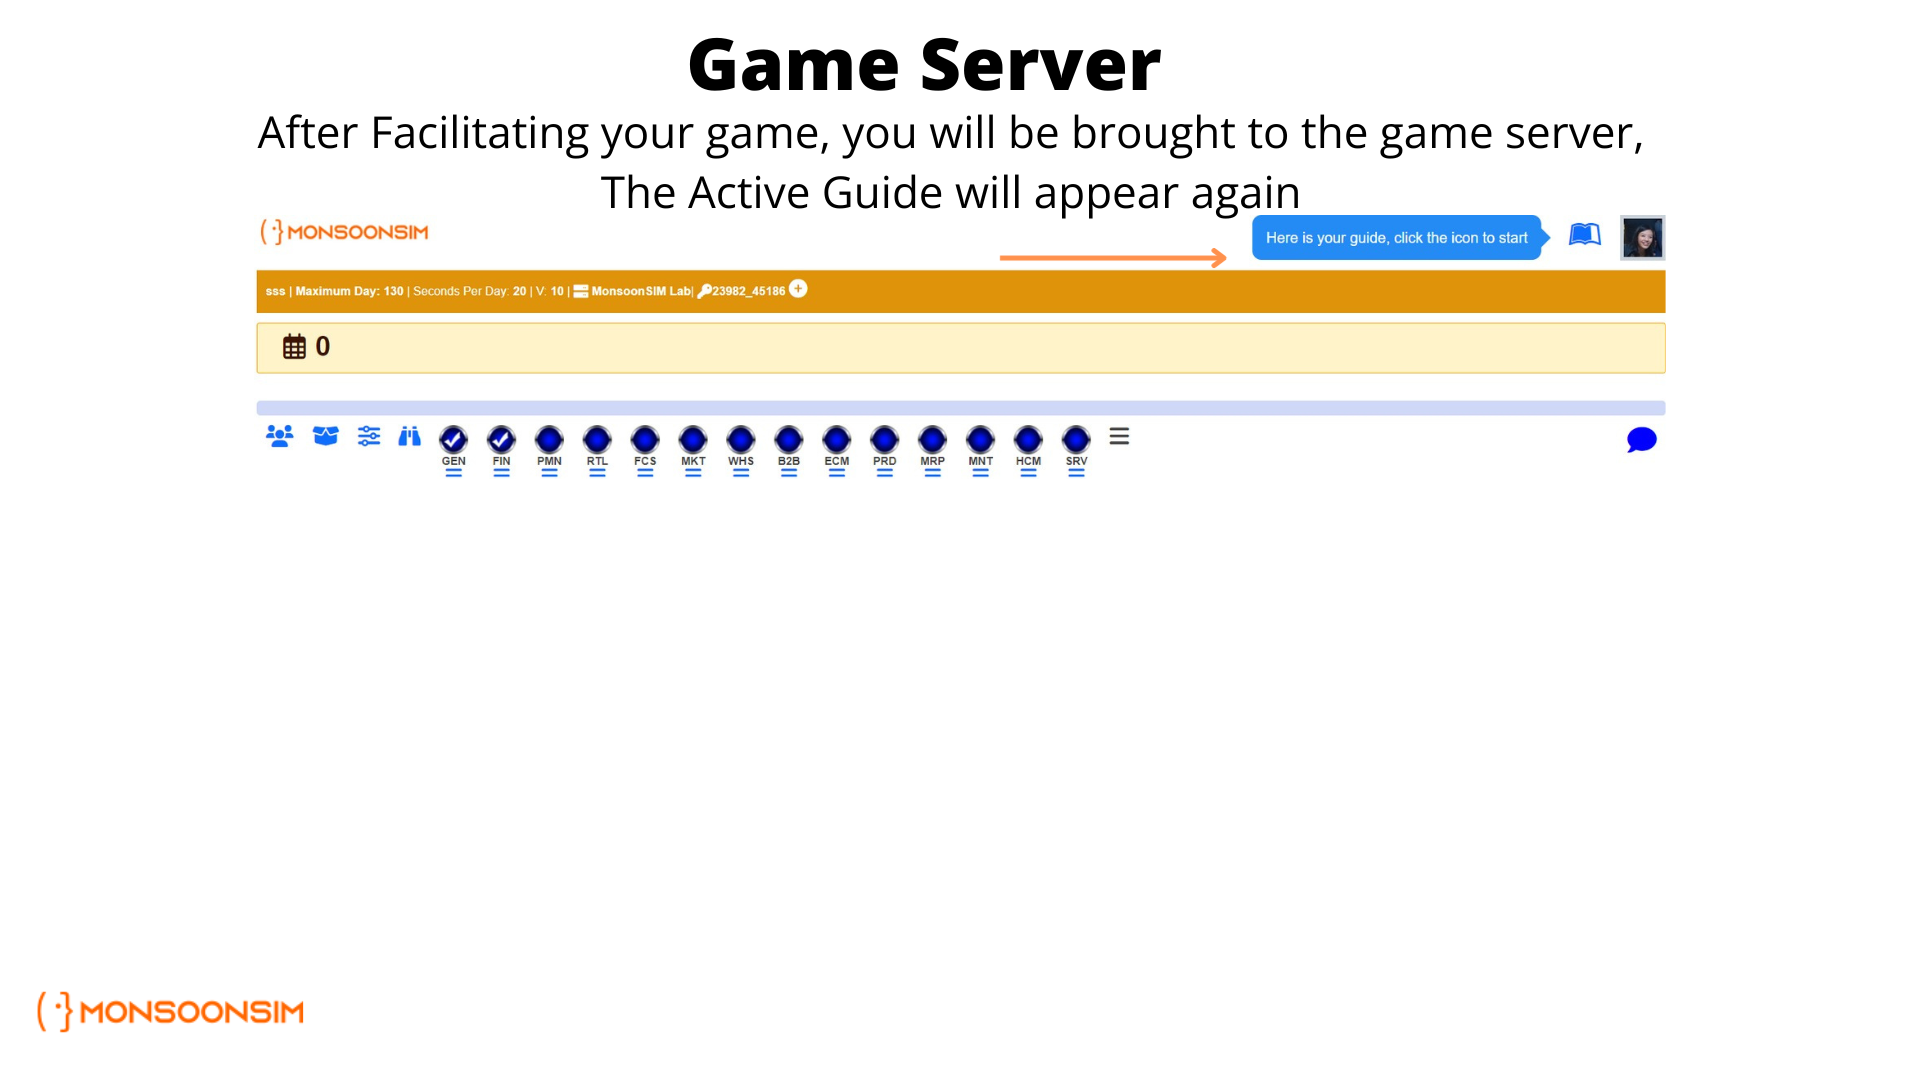  Screen indicating transition to game server after facilitating a MonsoonSIM game. It highlights the Active Guide's re-appearance with a prompt to click the guide icon to start. The user interface displays a status bar with currency, game days, and time settings, along with a unique lab identifier. Below, icons for various business modules like finance, marketing, and production are visible, with a notification and menu icon at the bottom.